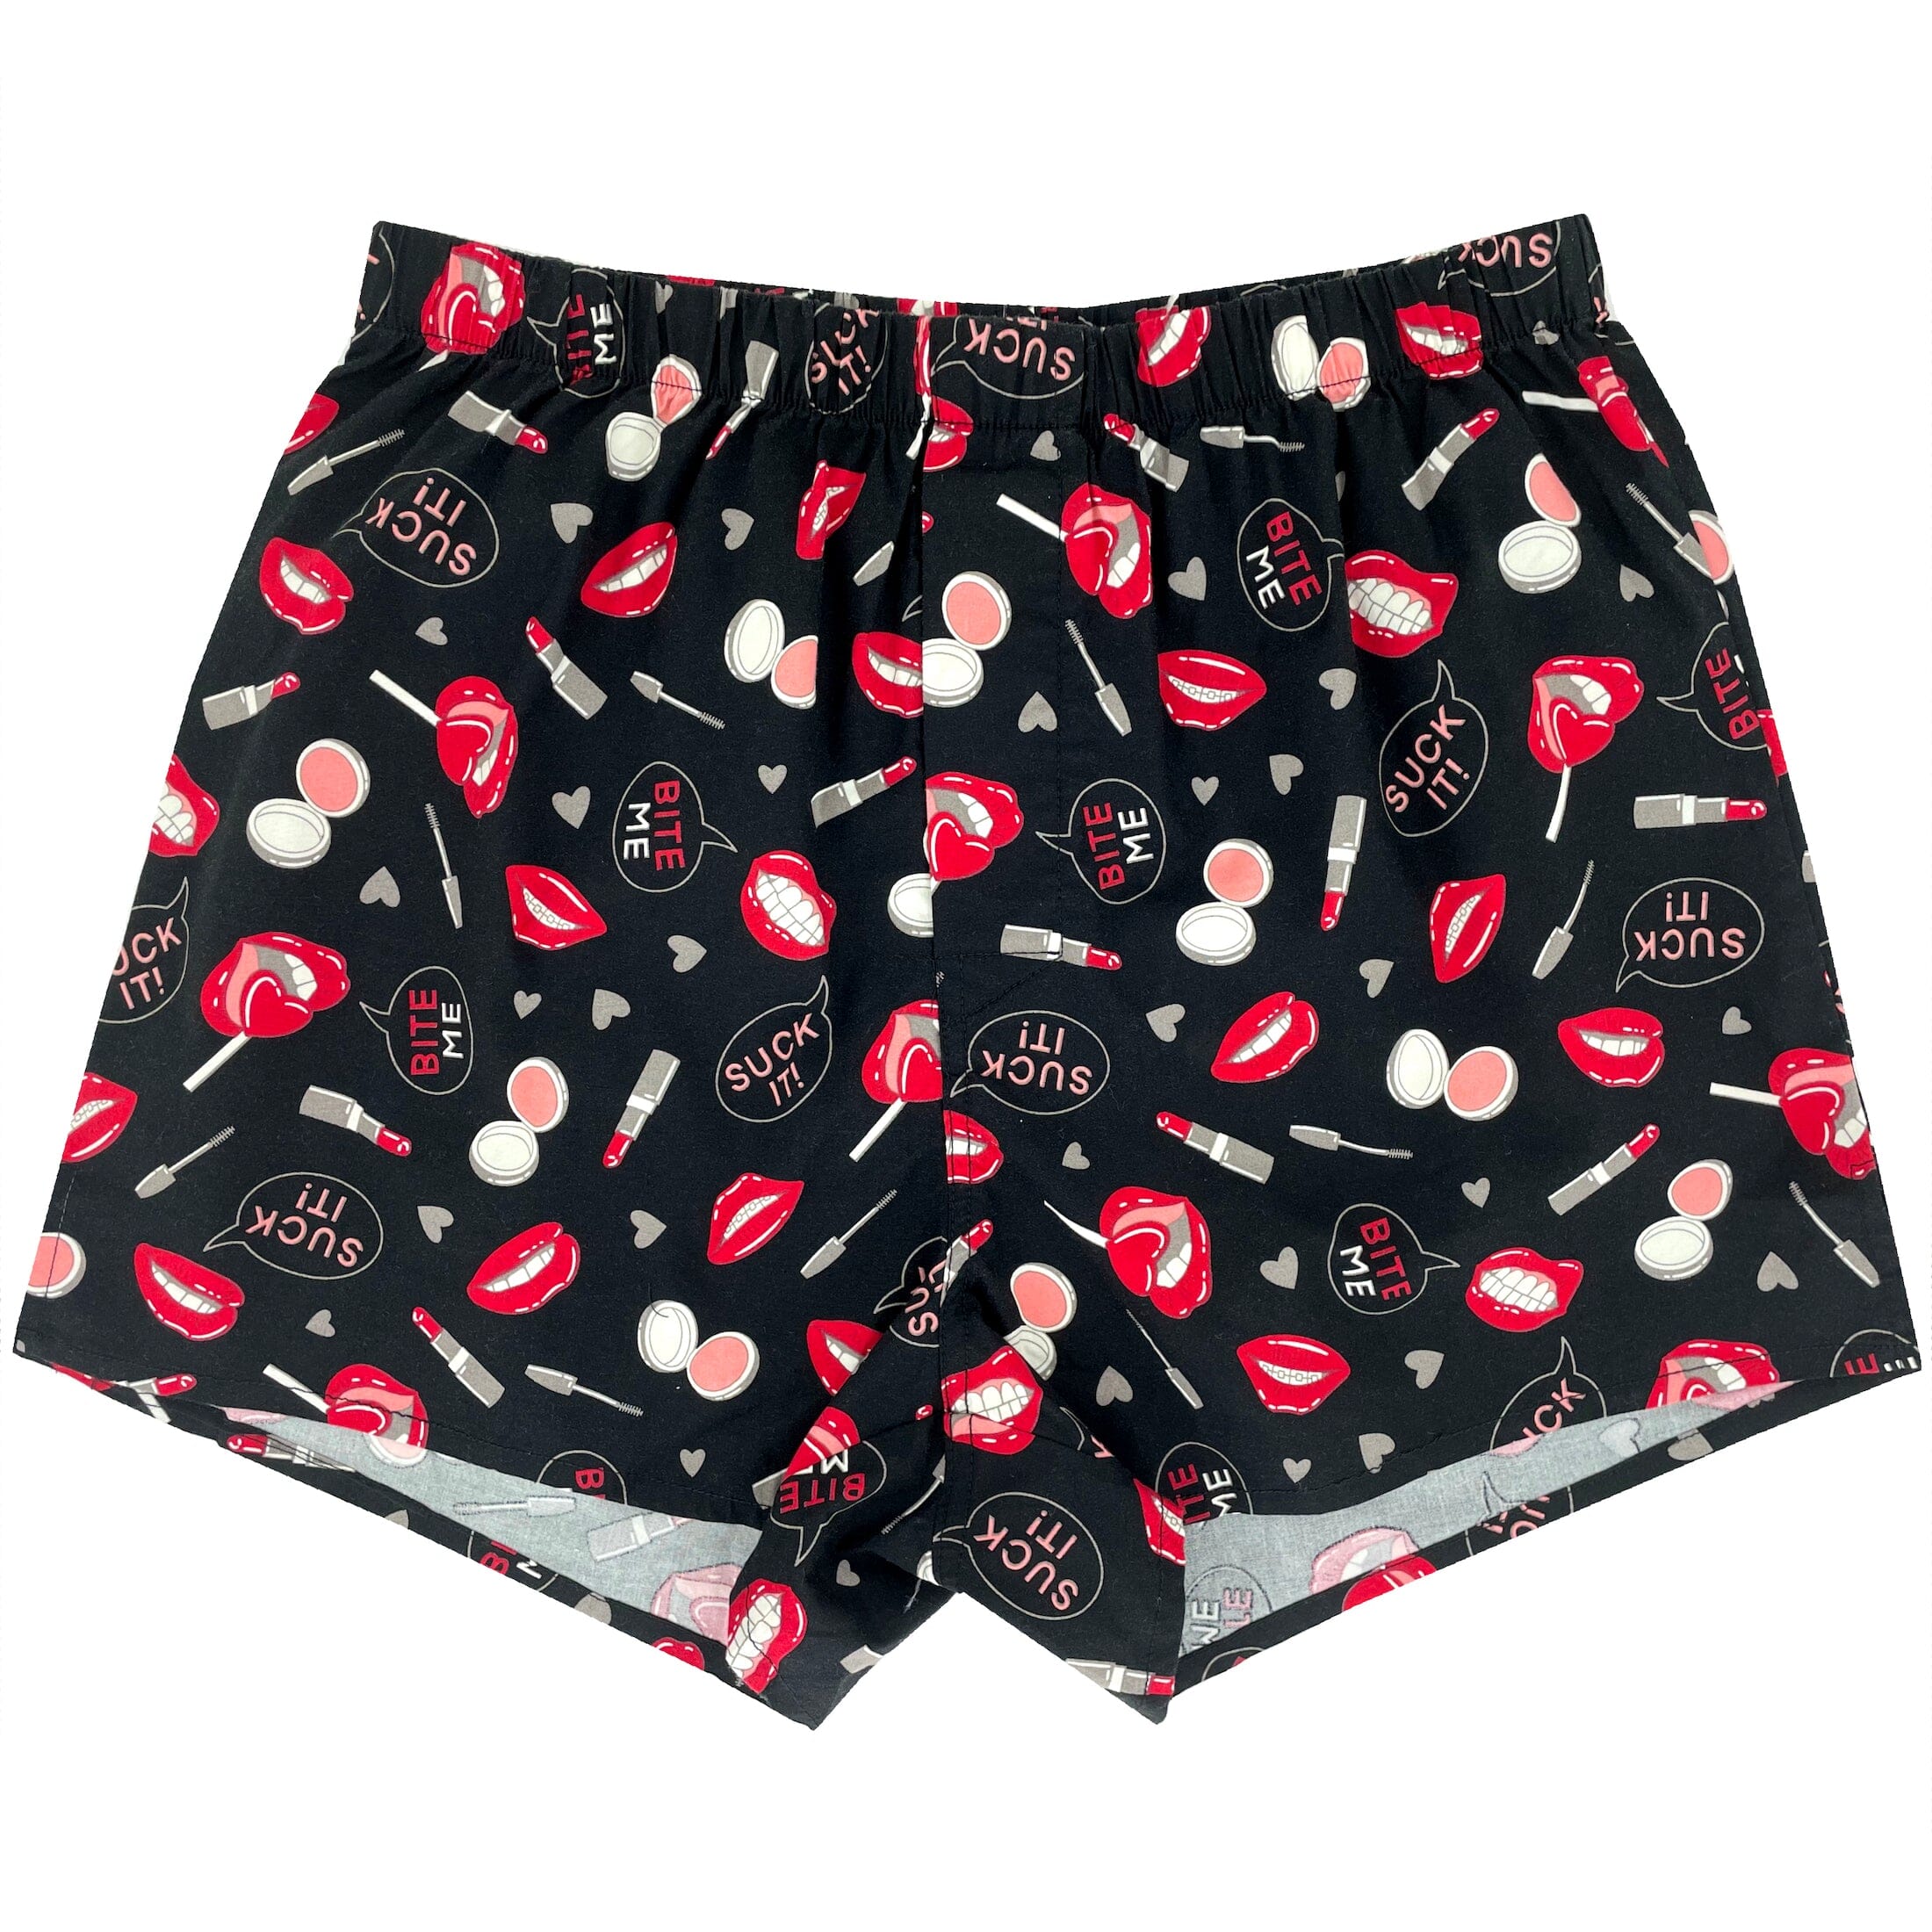 Men's Sexy & Suggestive Bright Red Lips Patterned Cotton Boxer Shorts